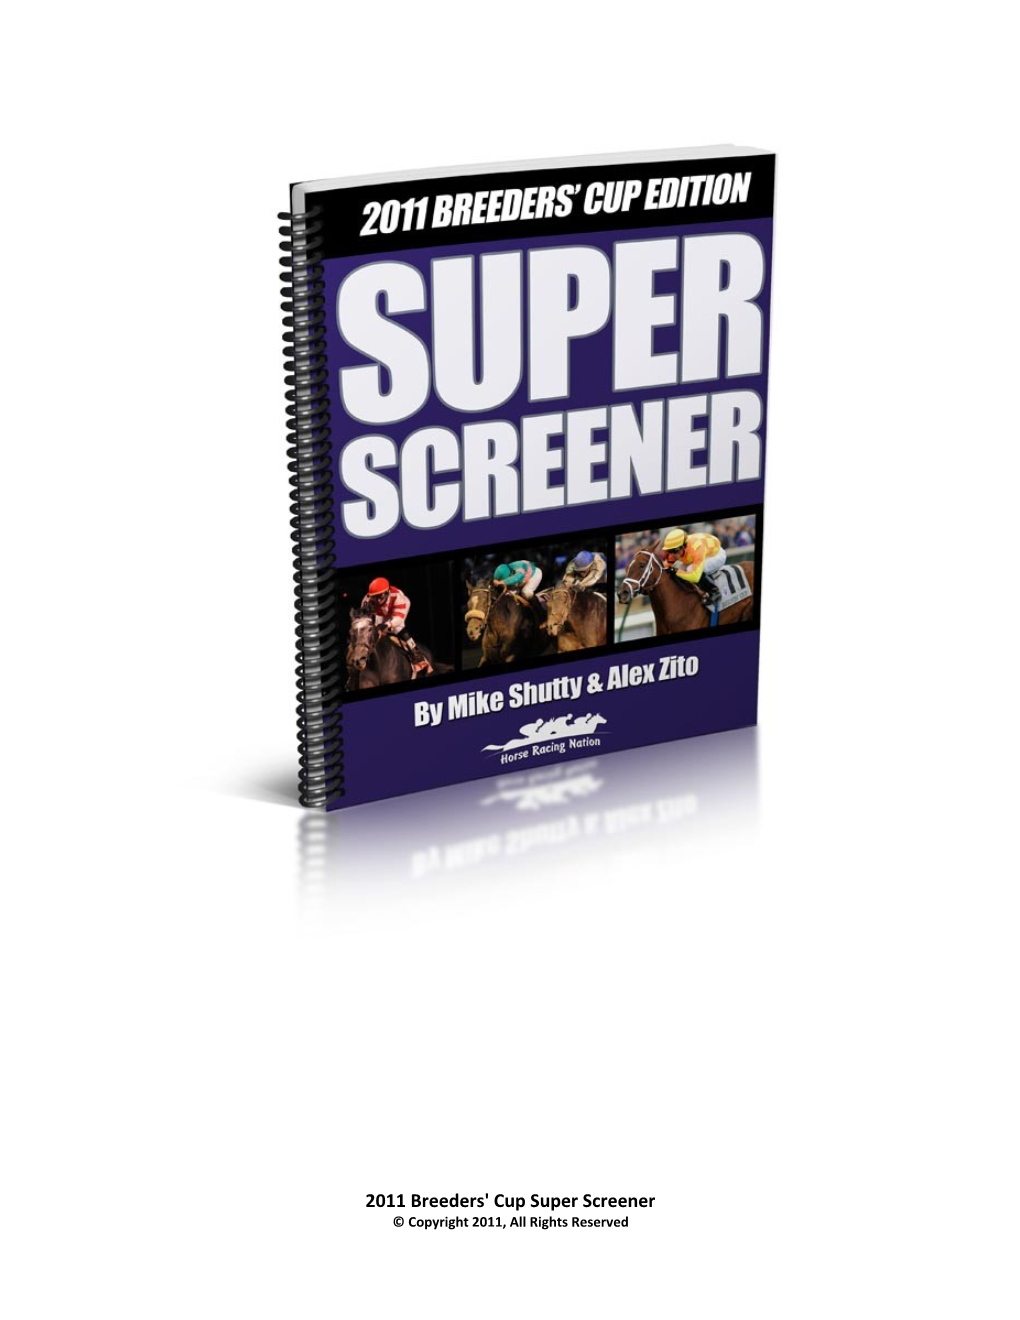 2011 Breeders' Cup Super Screener © Copyright 2011, All Rights Reserved Introduction